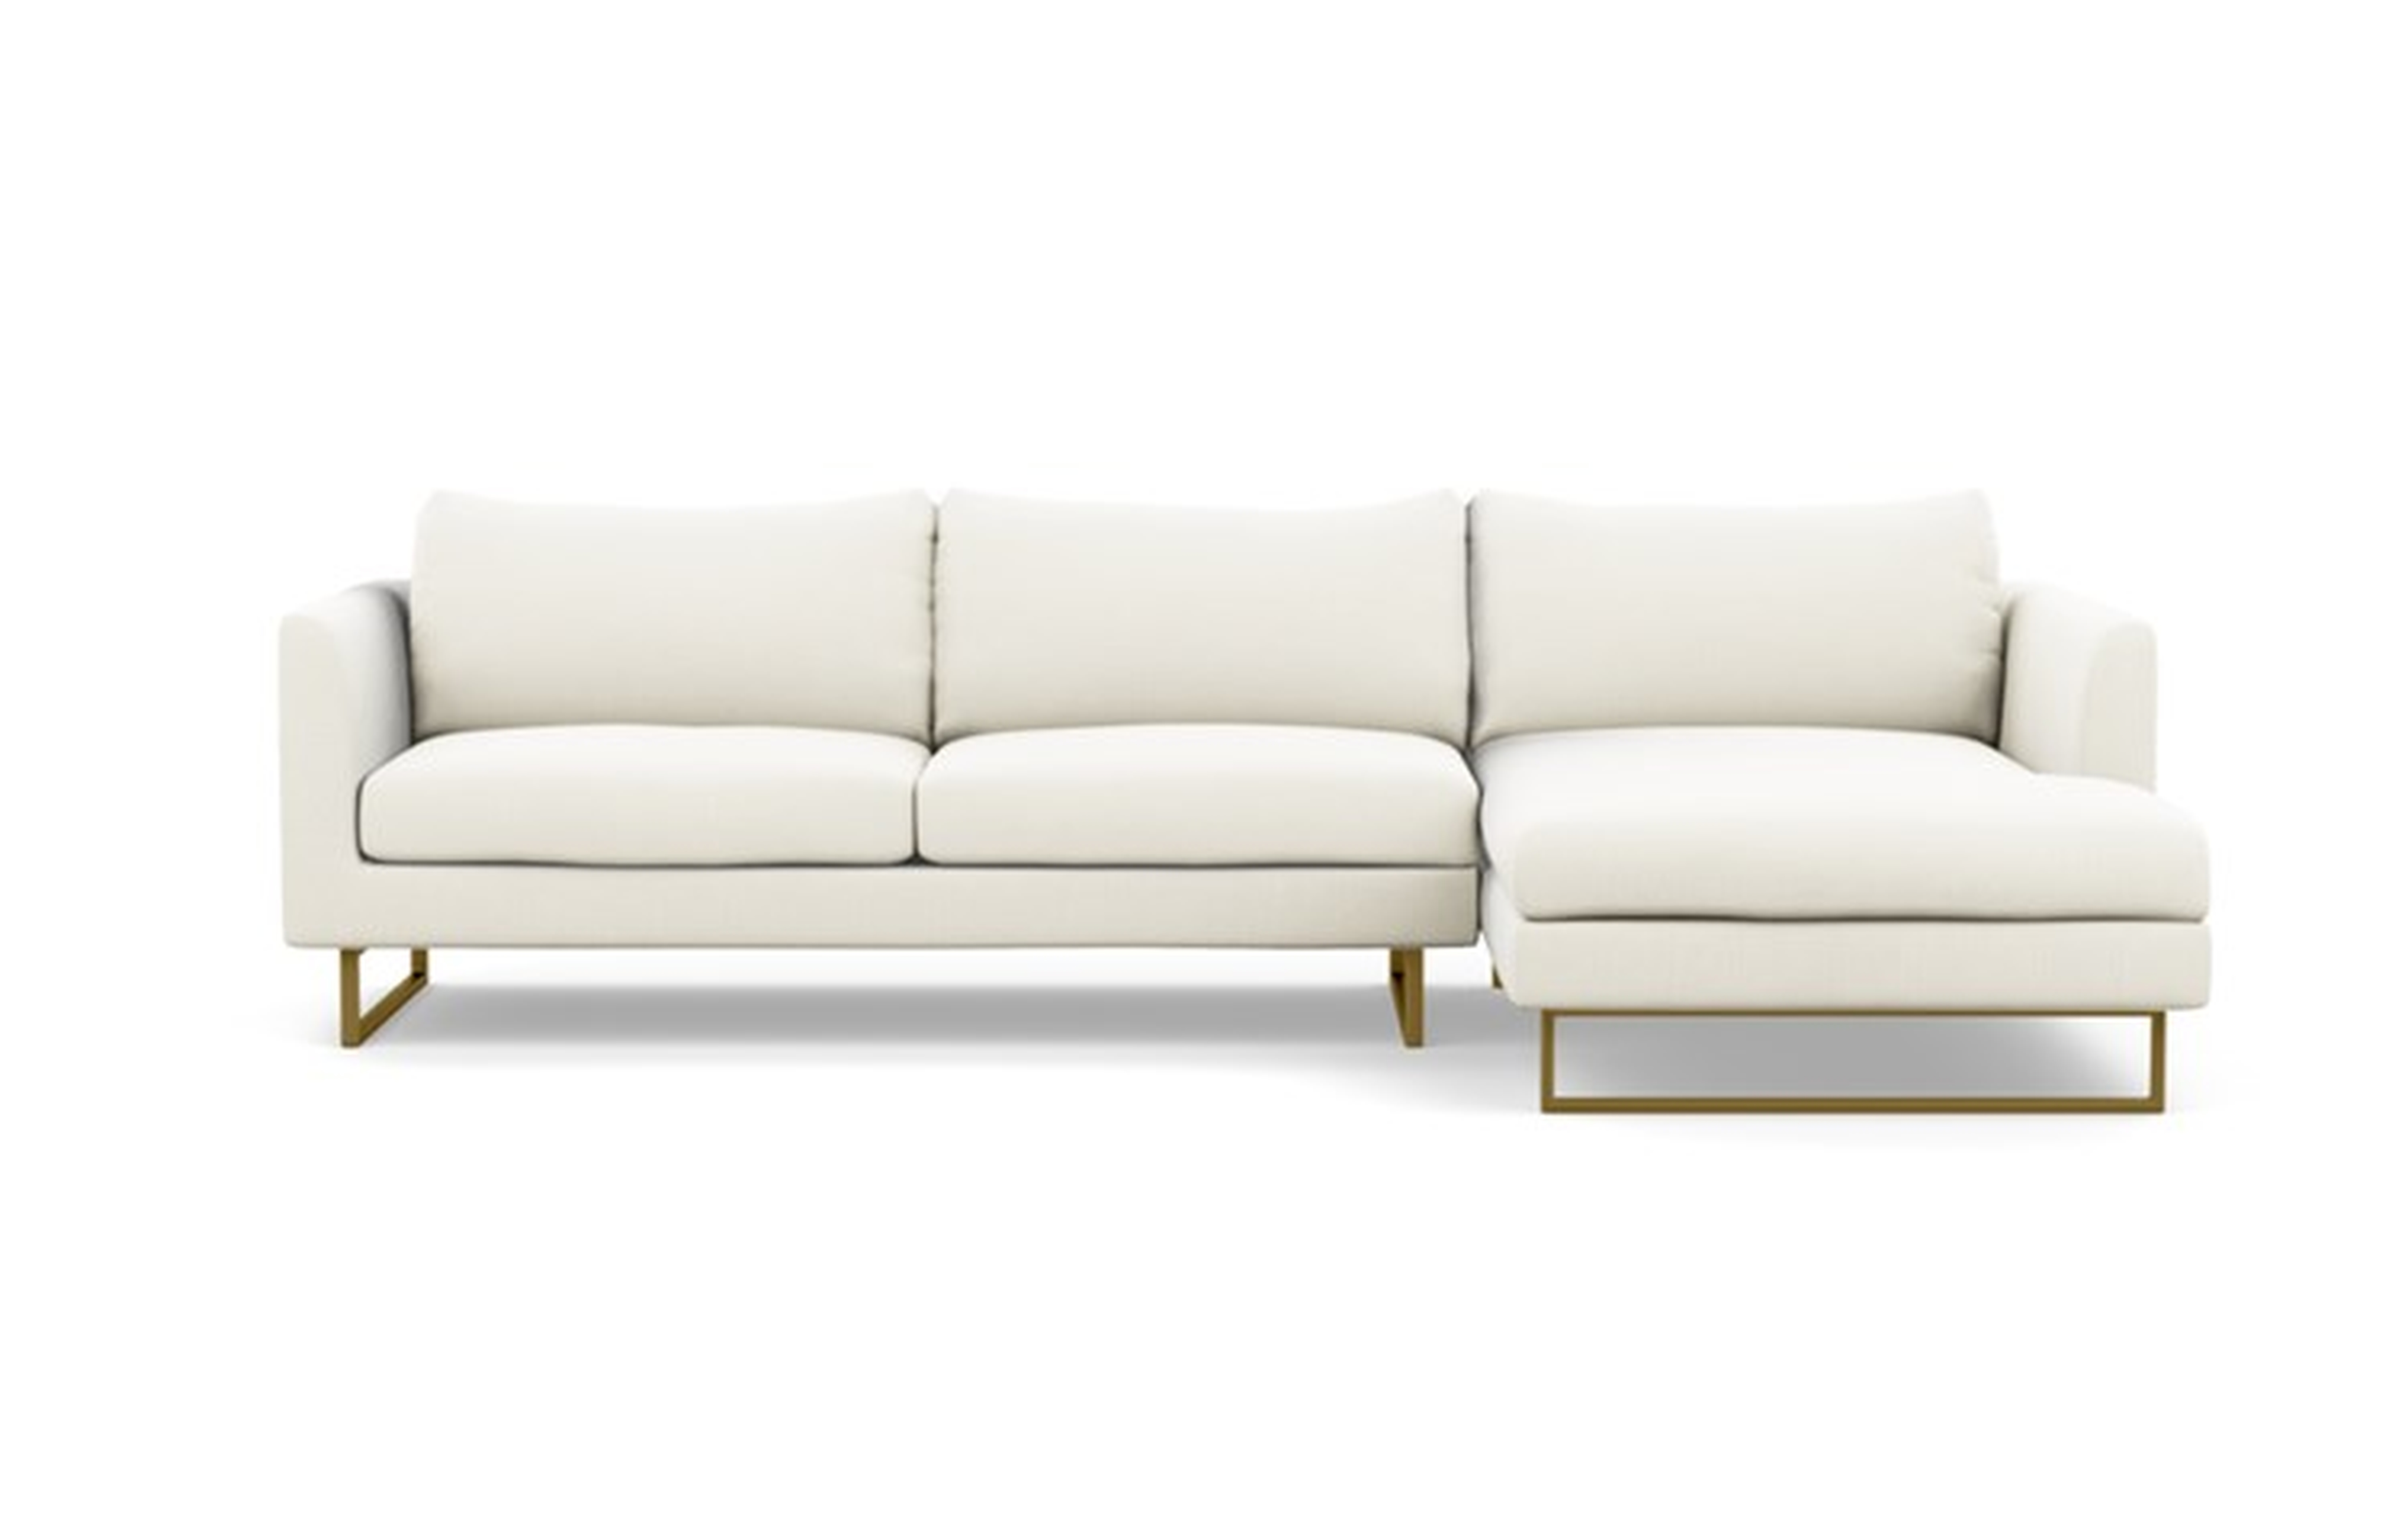 Owens Right Sectional with White Ivory Fabric, down alt. cushions, extended chaise, and Matte Brass legs - Interior Define